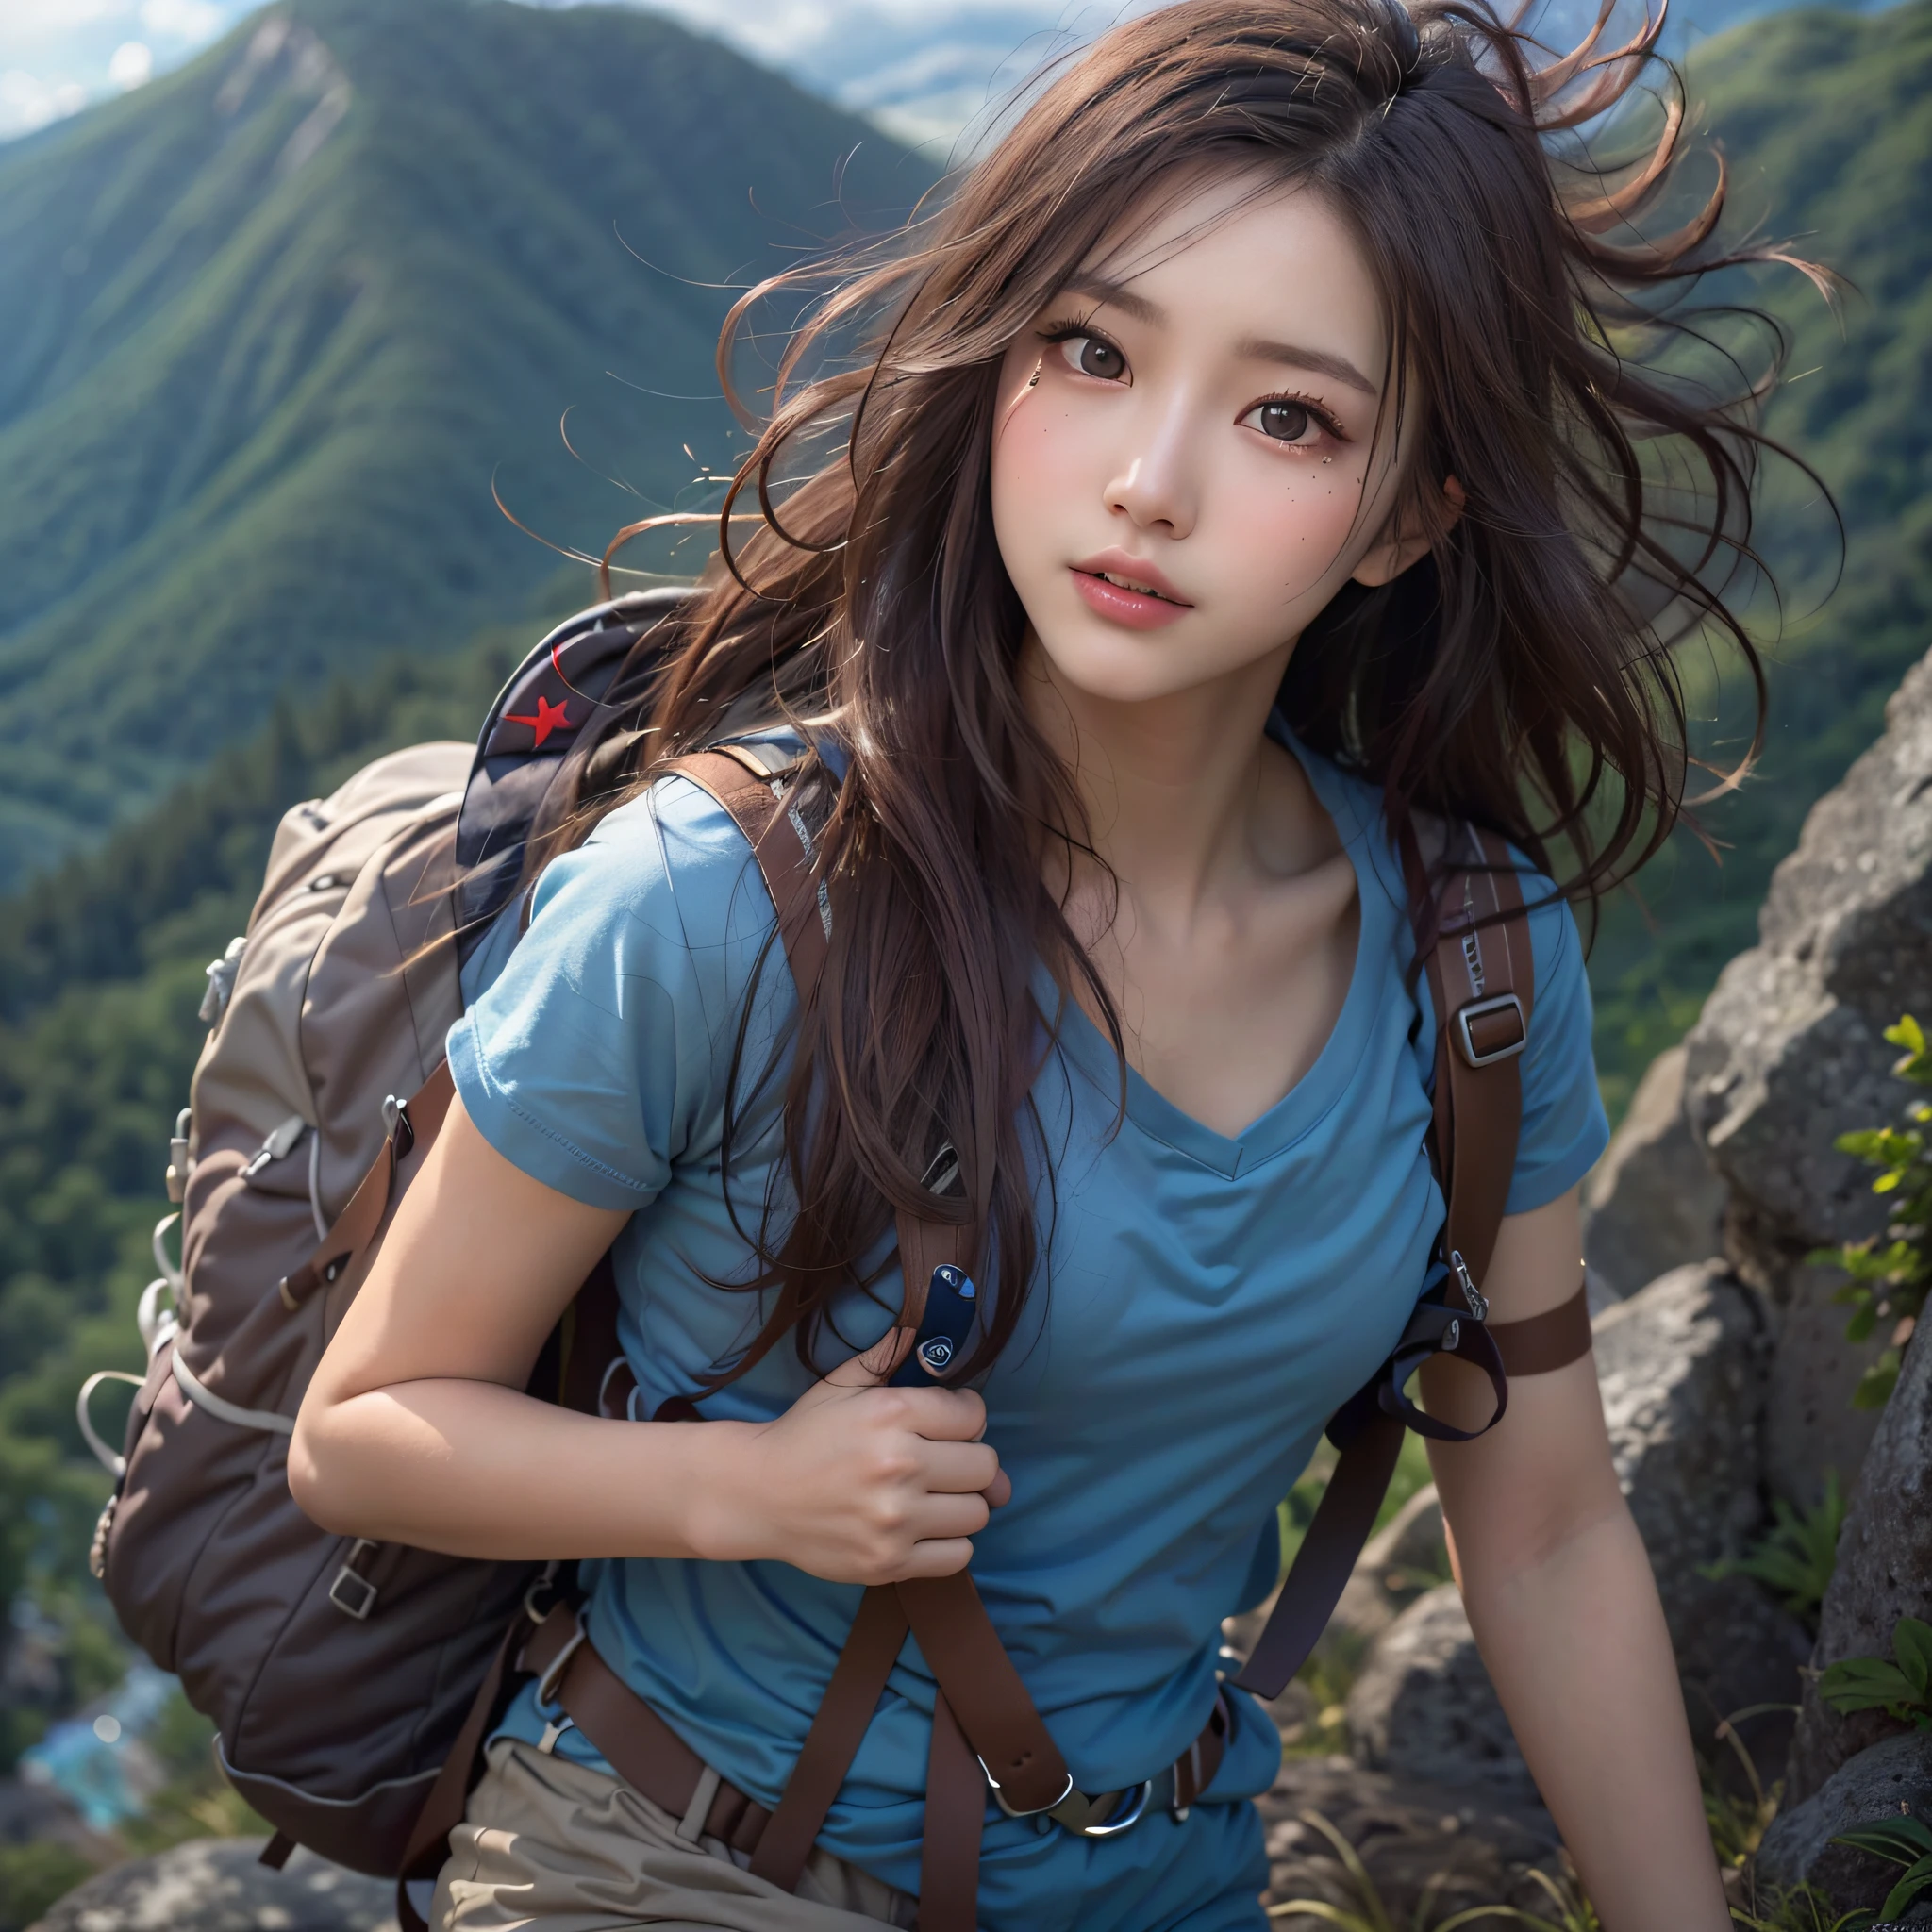 (Naturescape photography), (best quality), masterpiece:1.2, ultra high res, photorealistic:1.4, RAW photo, (Magnificent mountain, sea of clouds), (On a very high mountain peak), (sunset), (wideangle shot),  (Show cleavage:0.8),
(1girl), (Photo from the knee up:1.3), (18 years old), (happy:1.2), (shiny skin), (real skin), (semi-long hair, dark brown hair)
(loose white V-neck T-shirt, blue Trekking shorts), (Carrying a large backpack), 
(ultra detailed face), (ultra Beautiful fece), (ultra detailed eyes), (ultra detailed nose), (ultra detailed mouth), (ultra detailed arms), (ultra detailed body), pan focus, looking at the audience